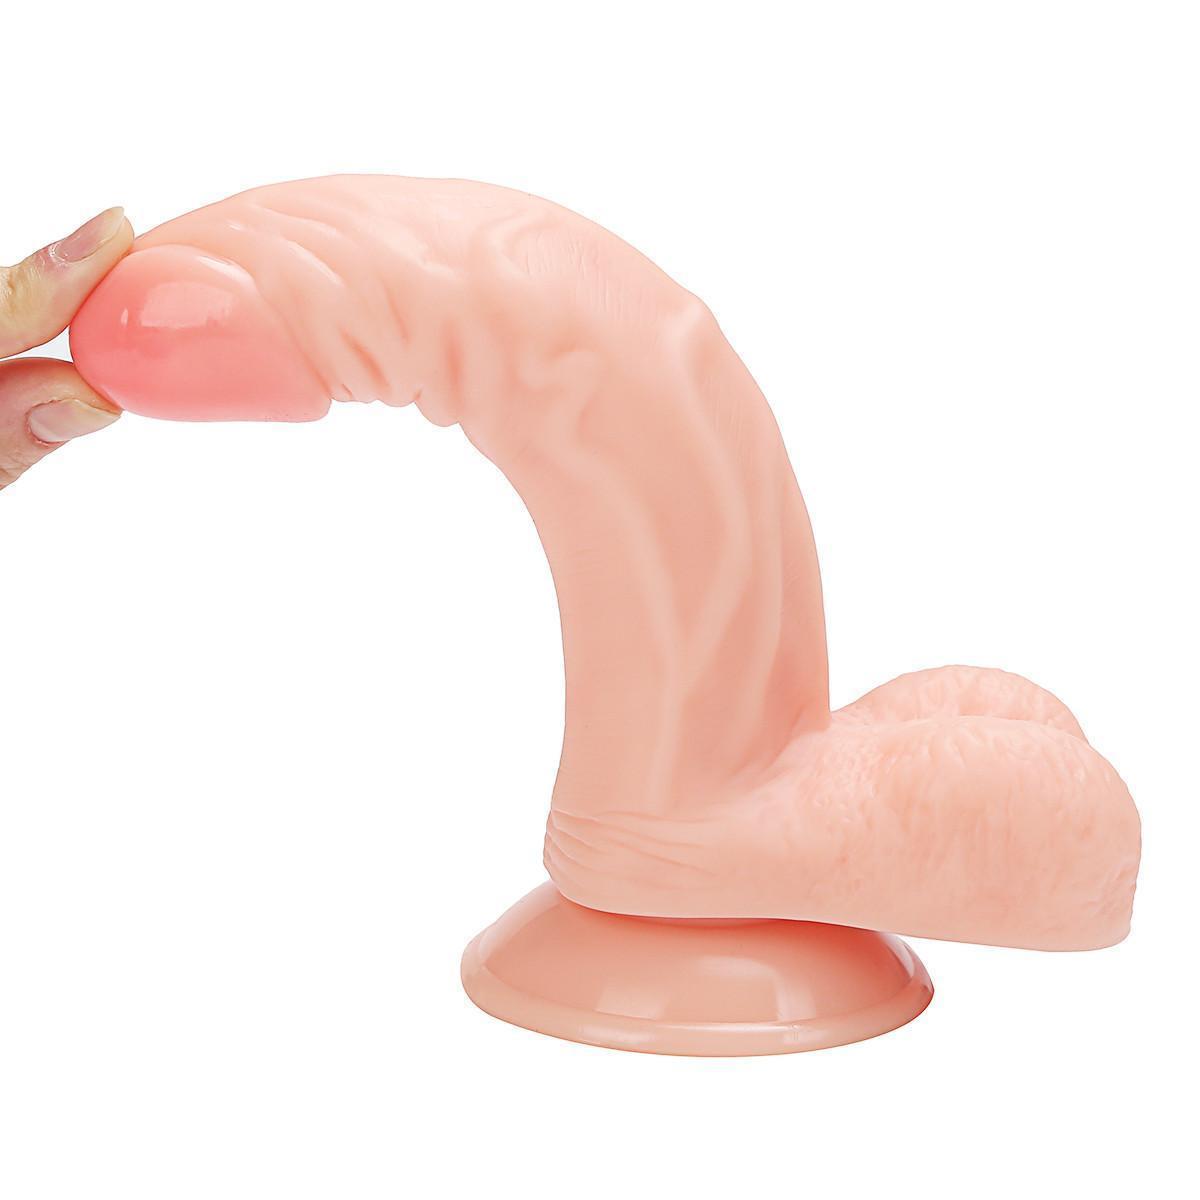 Simulated penis with suction cups, female sex toy dildo wl267